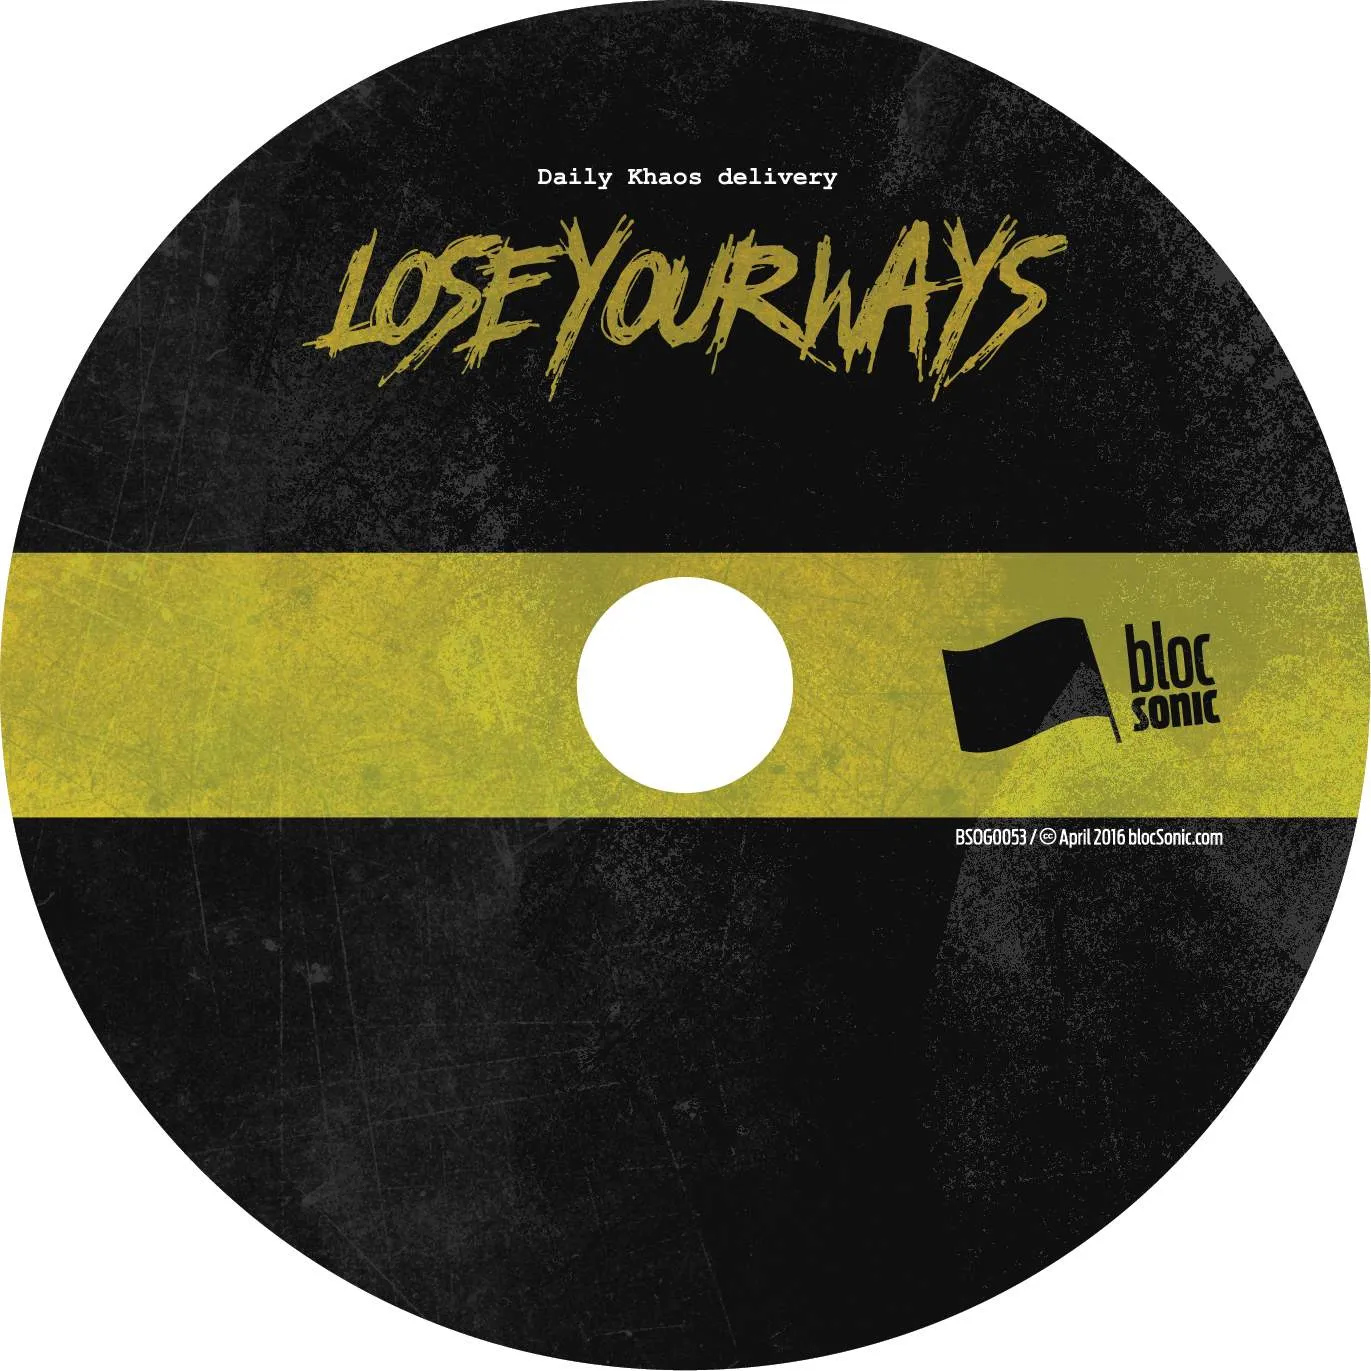 Album disc for “Lose Your Ways” by Daily Khaos delivery